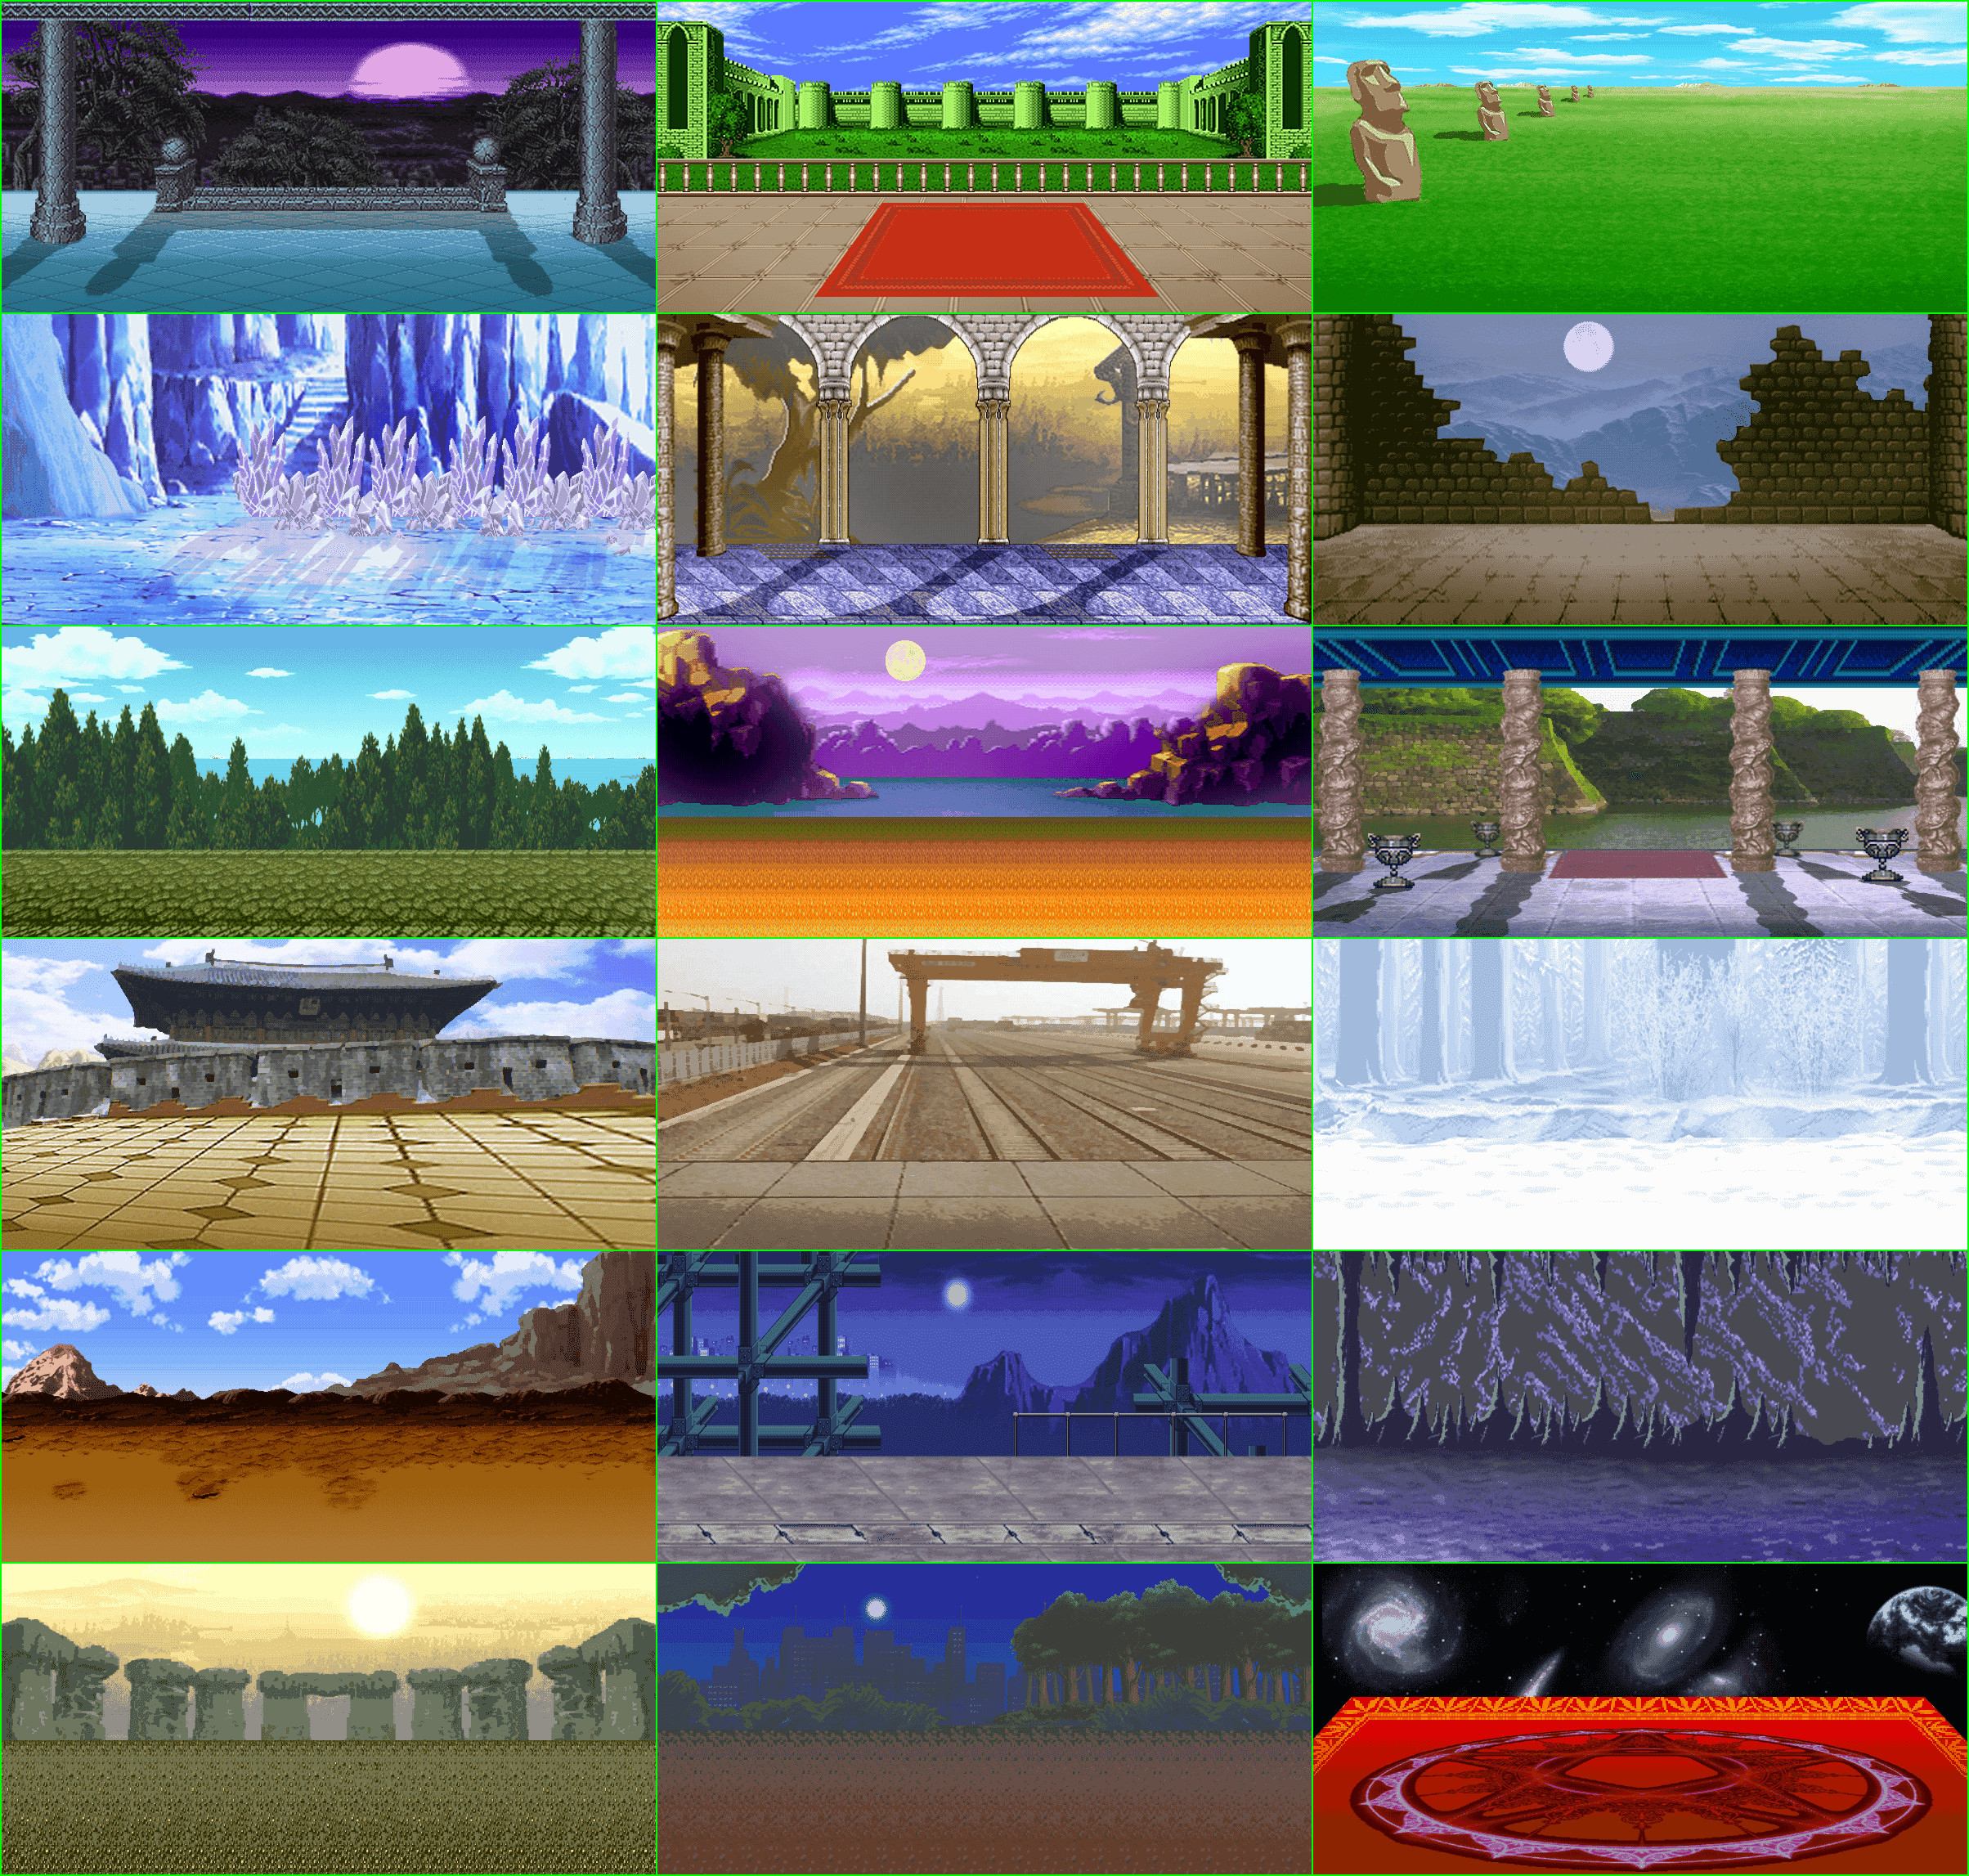 Vs. Mode Stages (Pre-0.7.6)